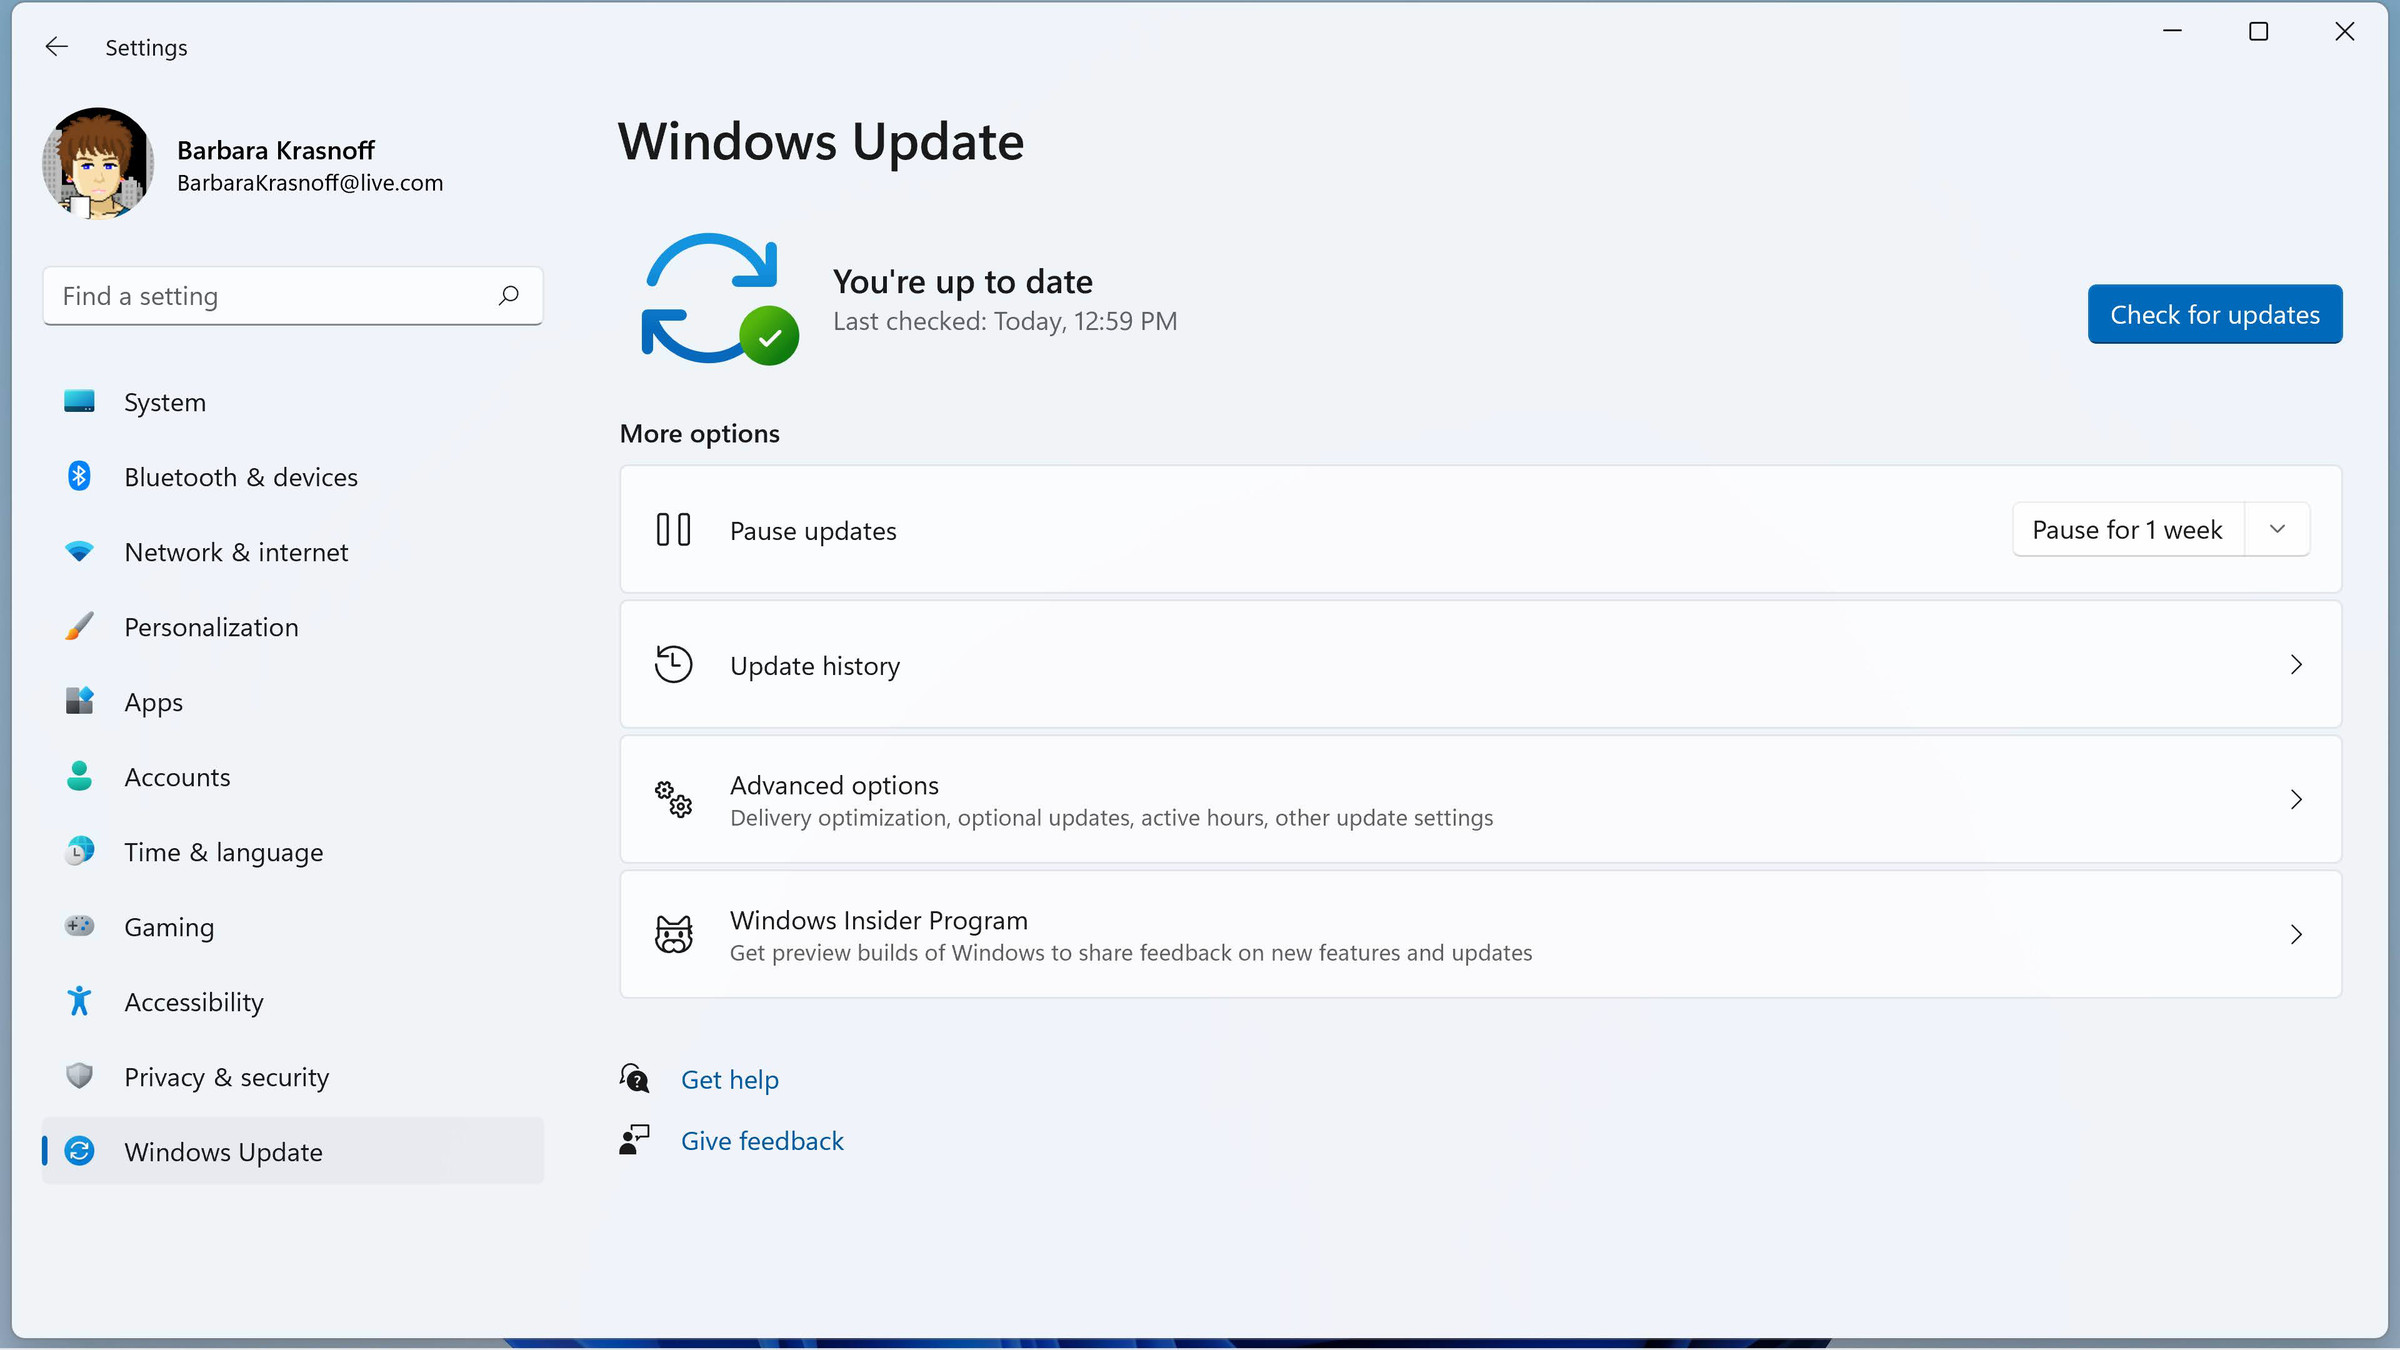 Open Windows Update to see if you’re up-to-date.